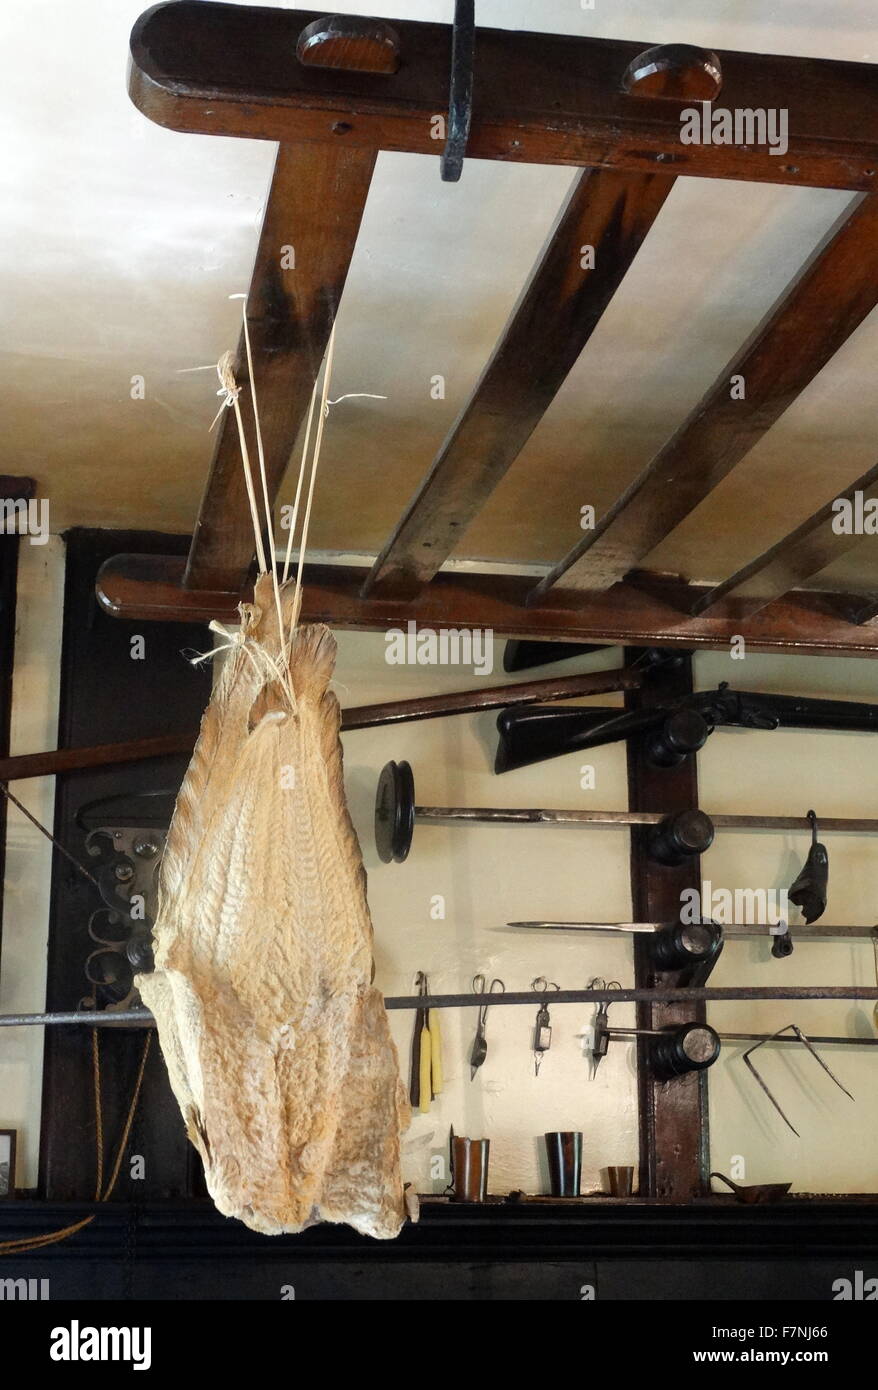 dried fish hang rom the ceiling of a 17th century Dutch kitchen Stock Photo